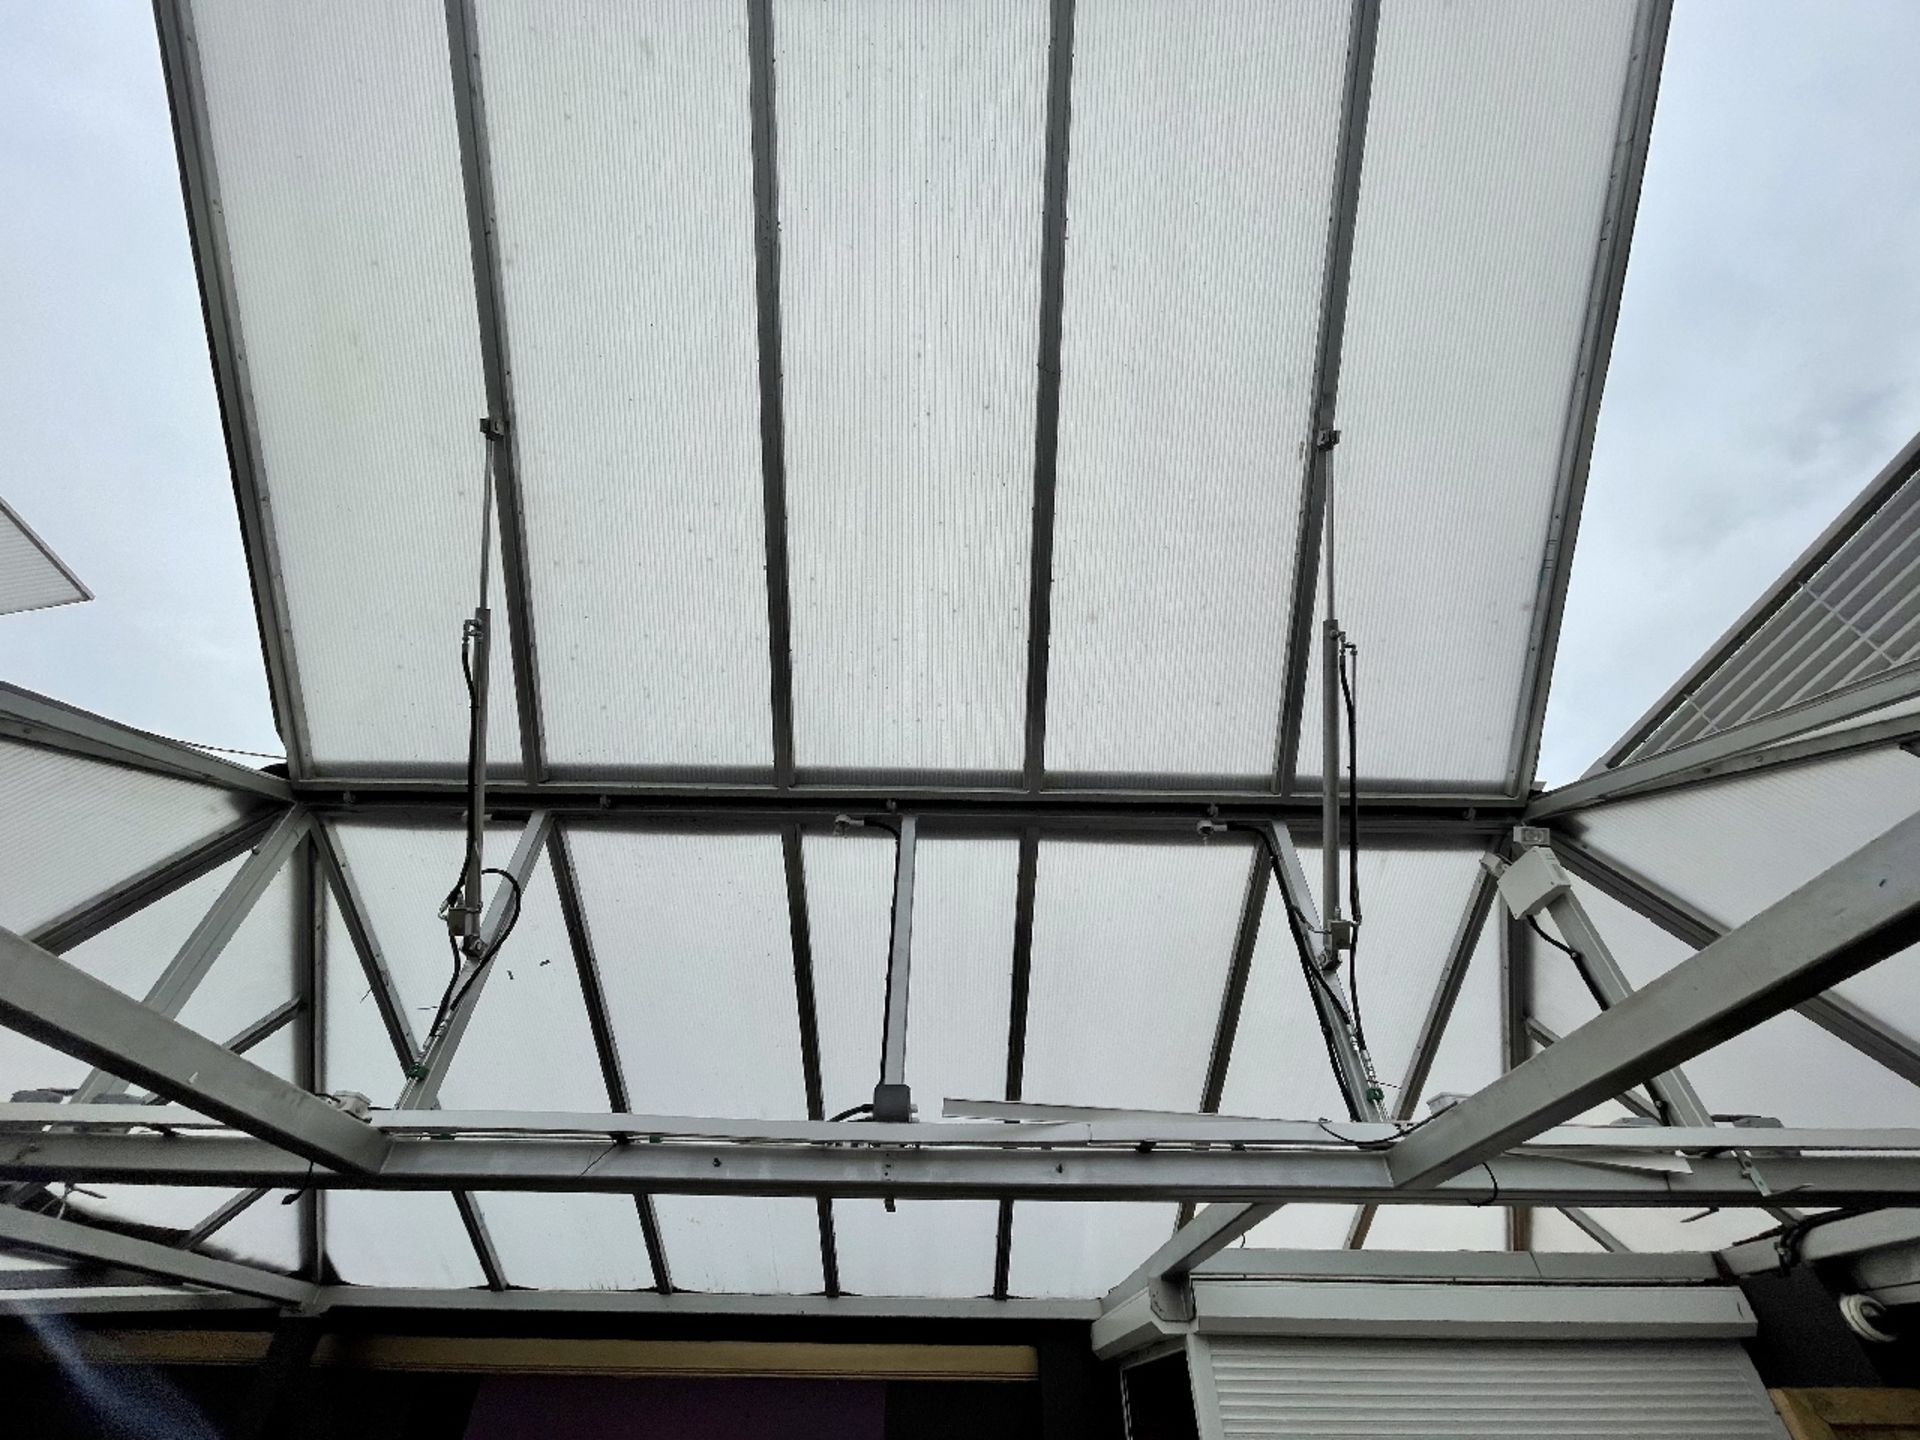 Hydraulic Roof - Image 3 of 5